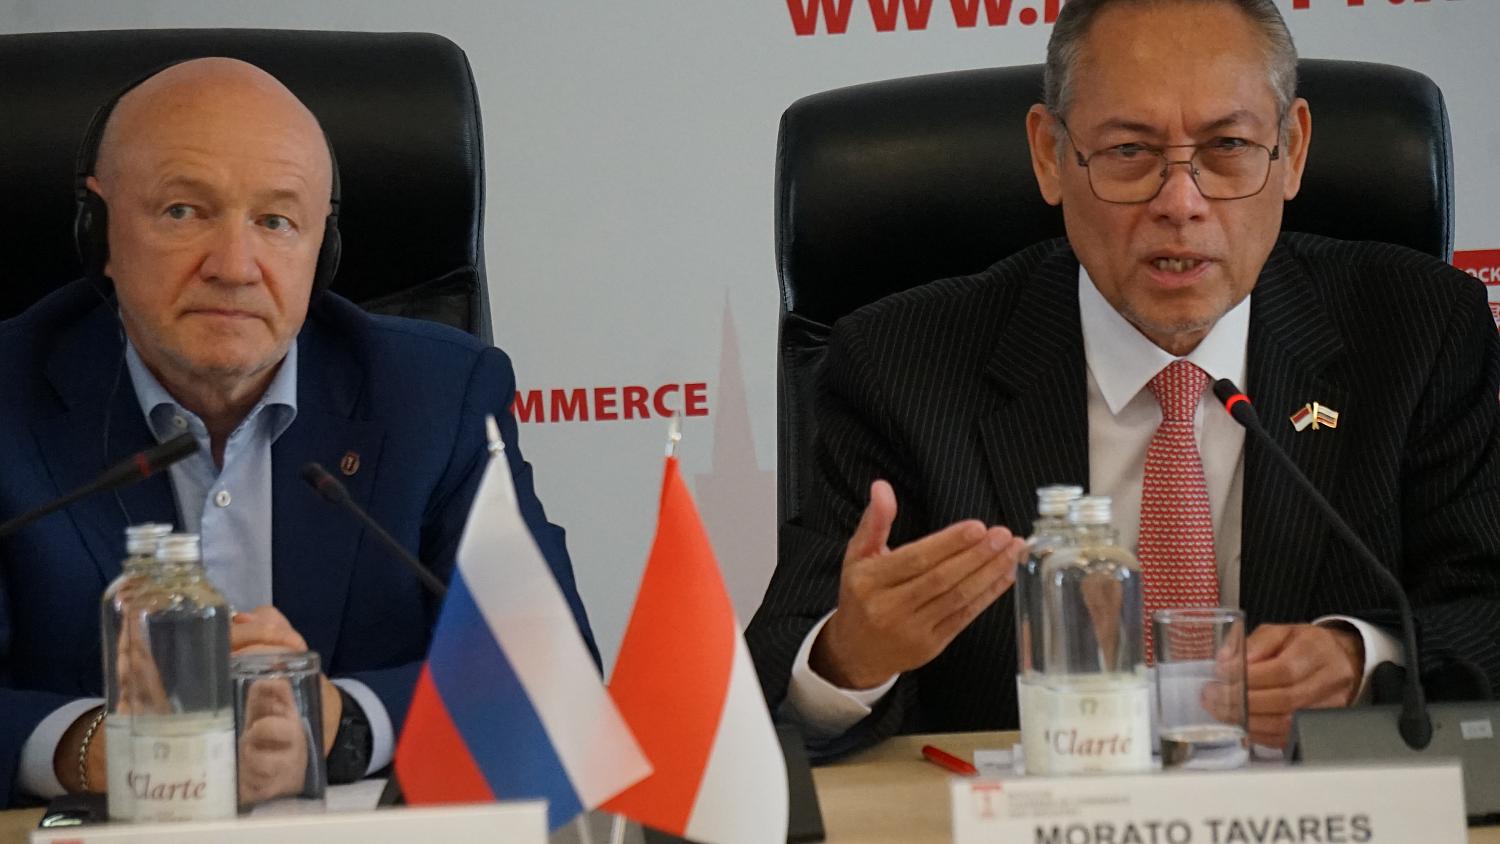 Entrepreneurs from Moscow and Indonesia discussed new business opportunities